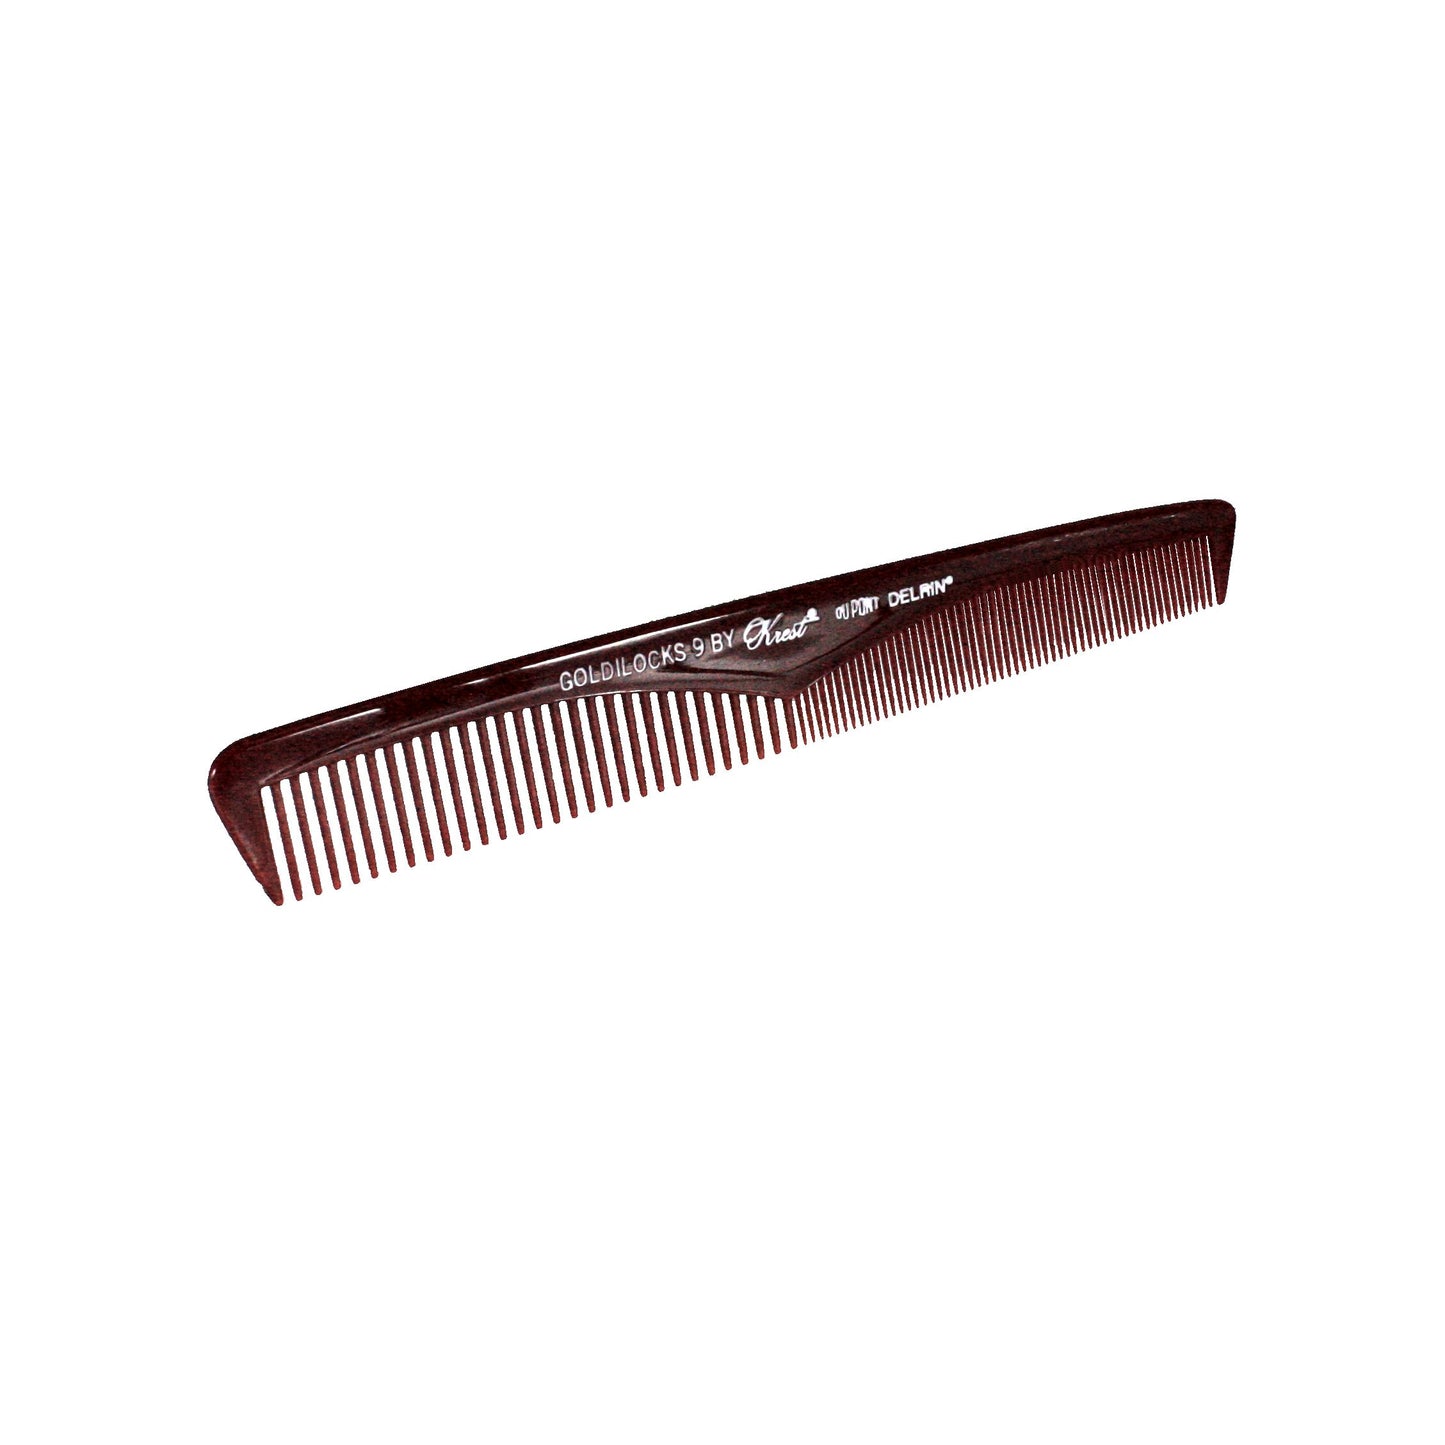 7.5in Extra Thin Taper/Clipper Comb - CLOSEOUT, LIMITED STOCK AVAILABLE